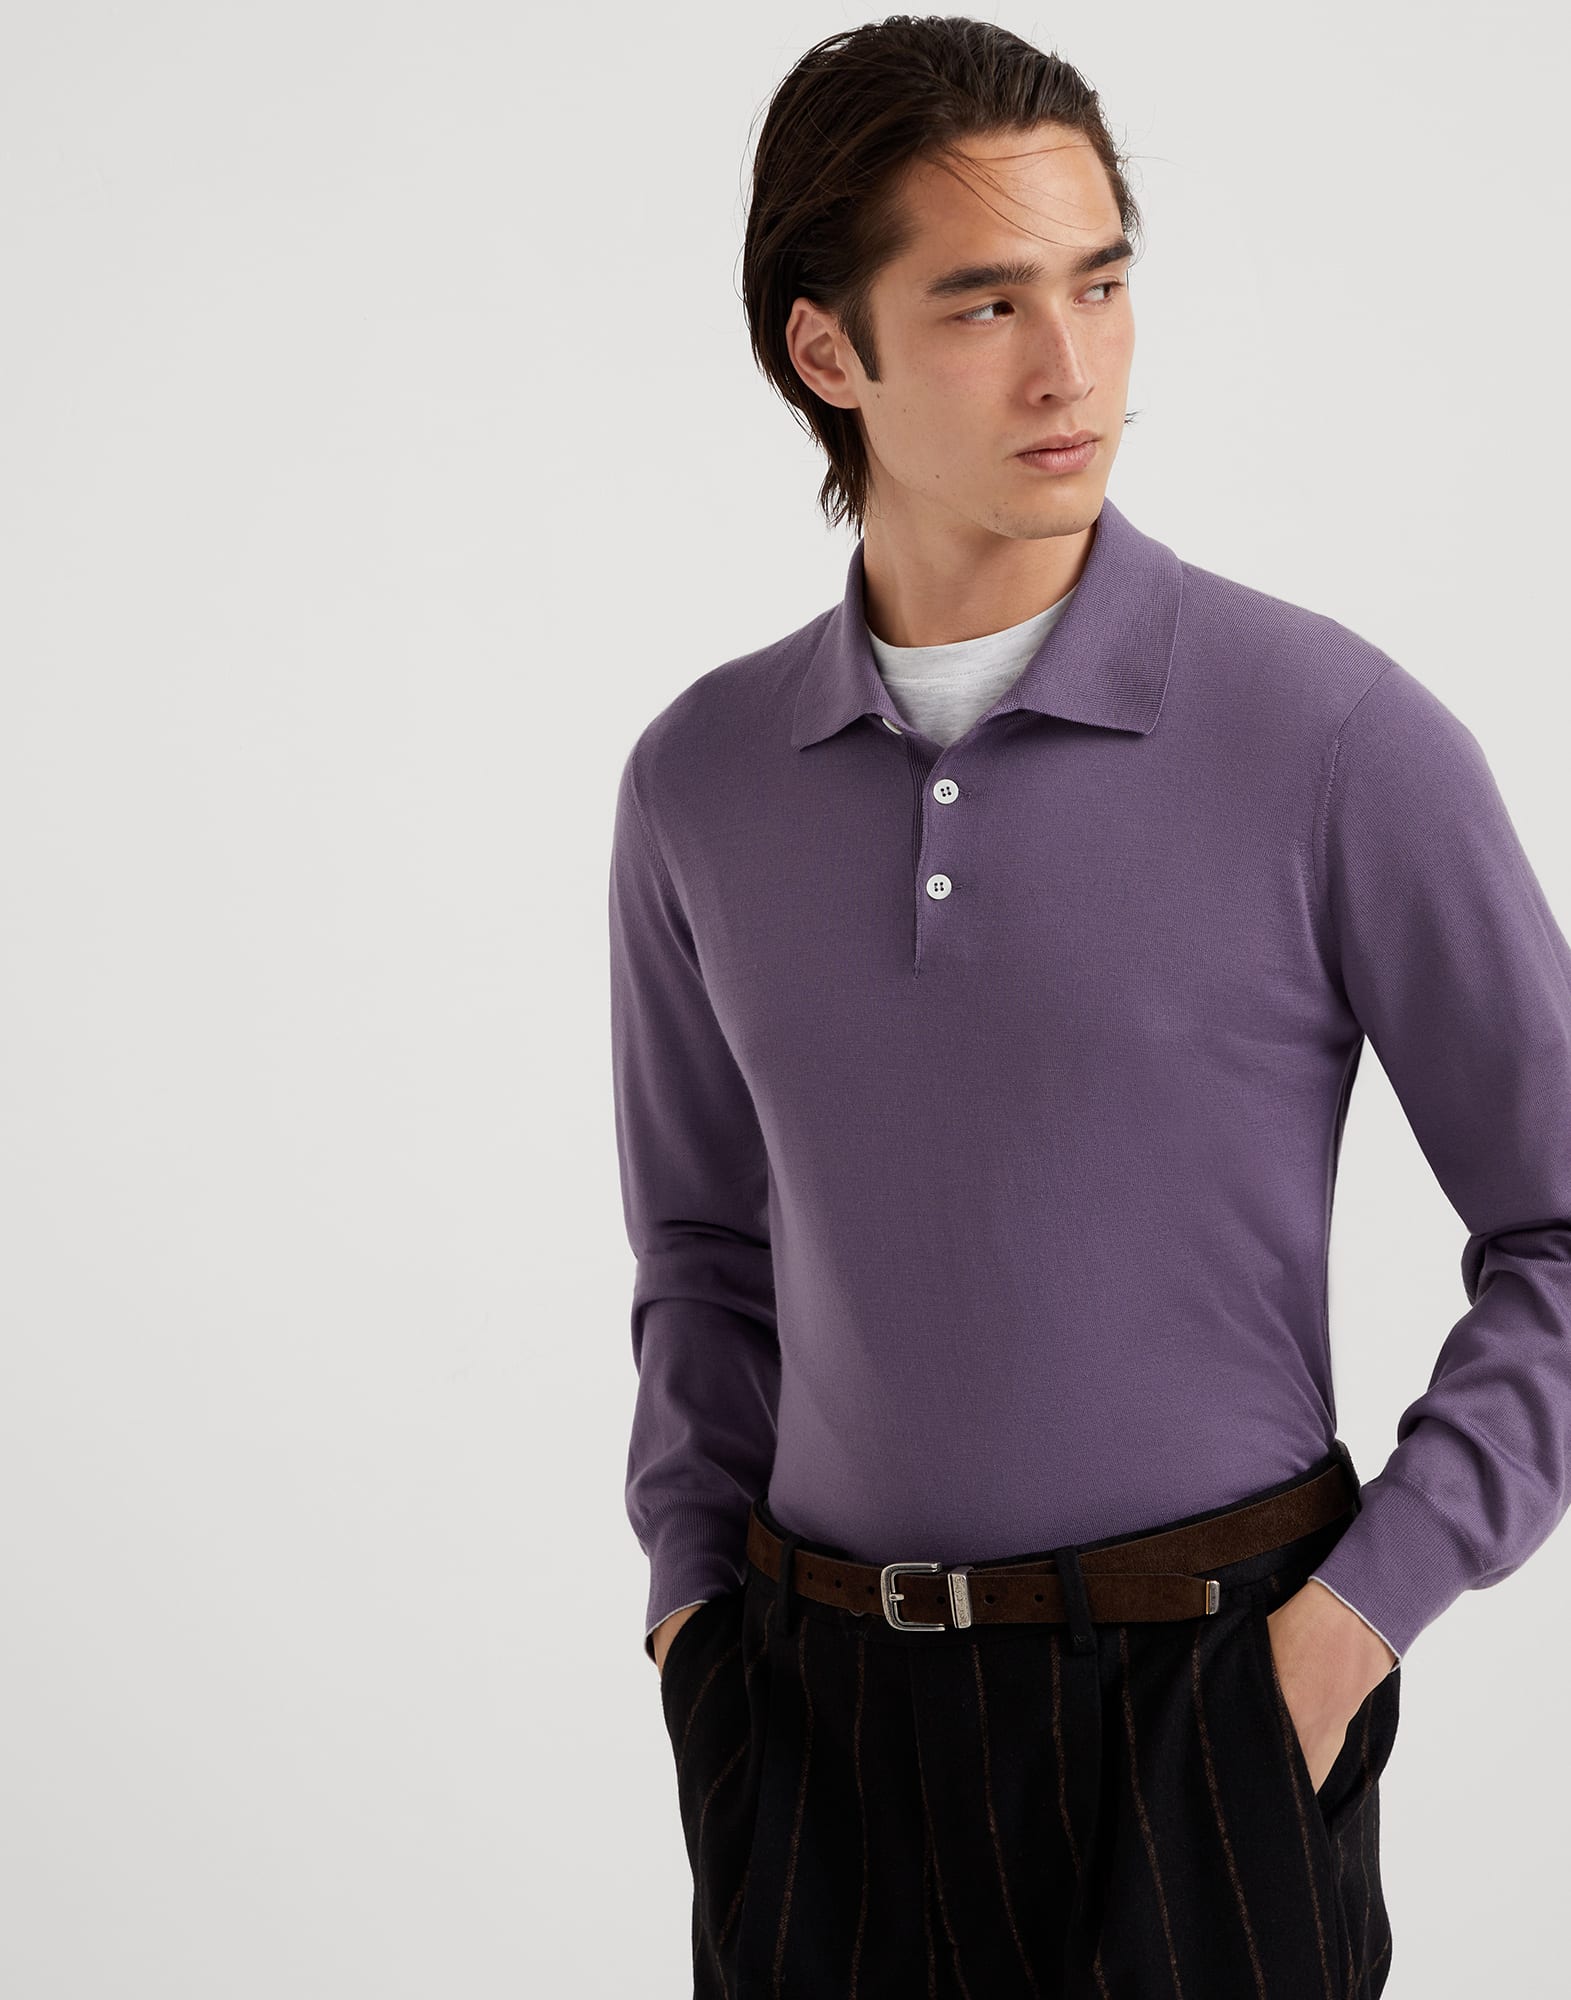 Pull style polo